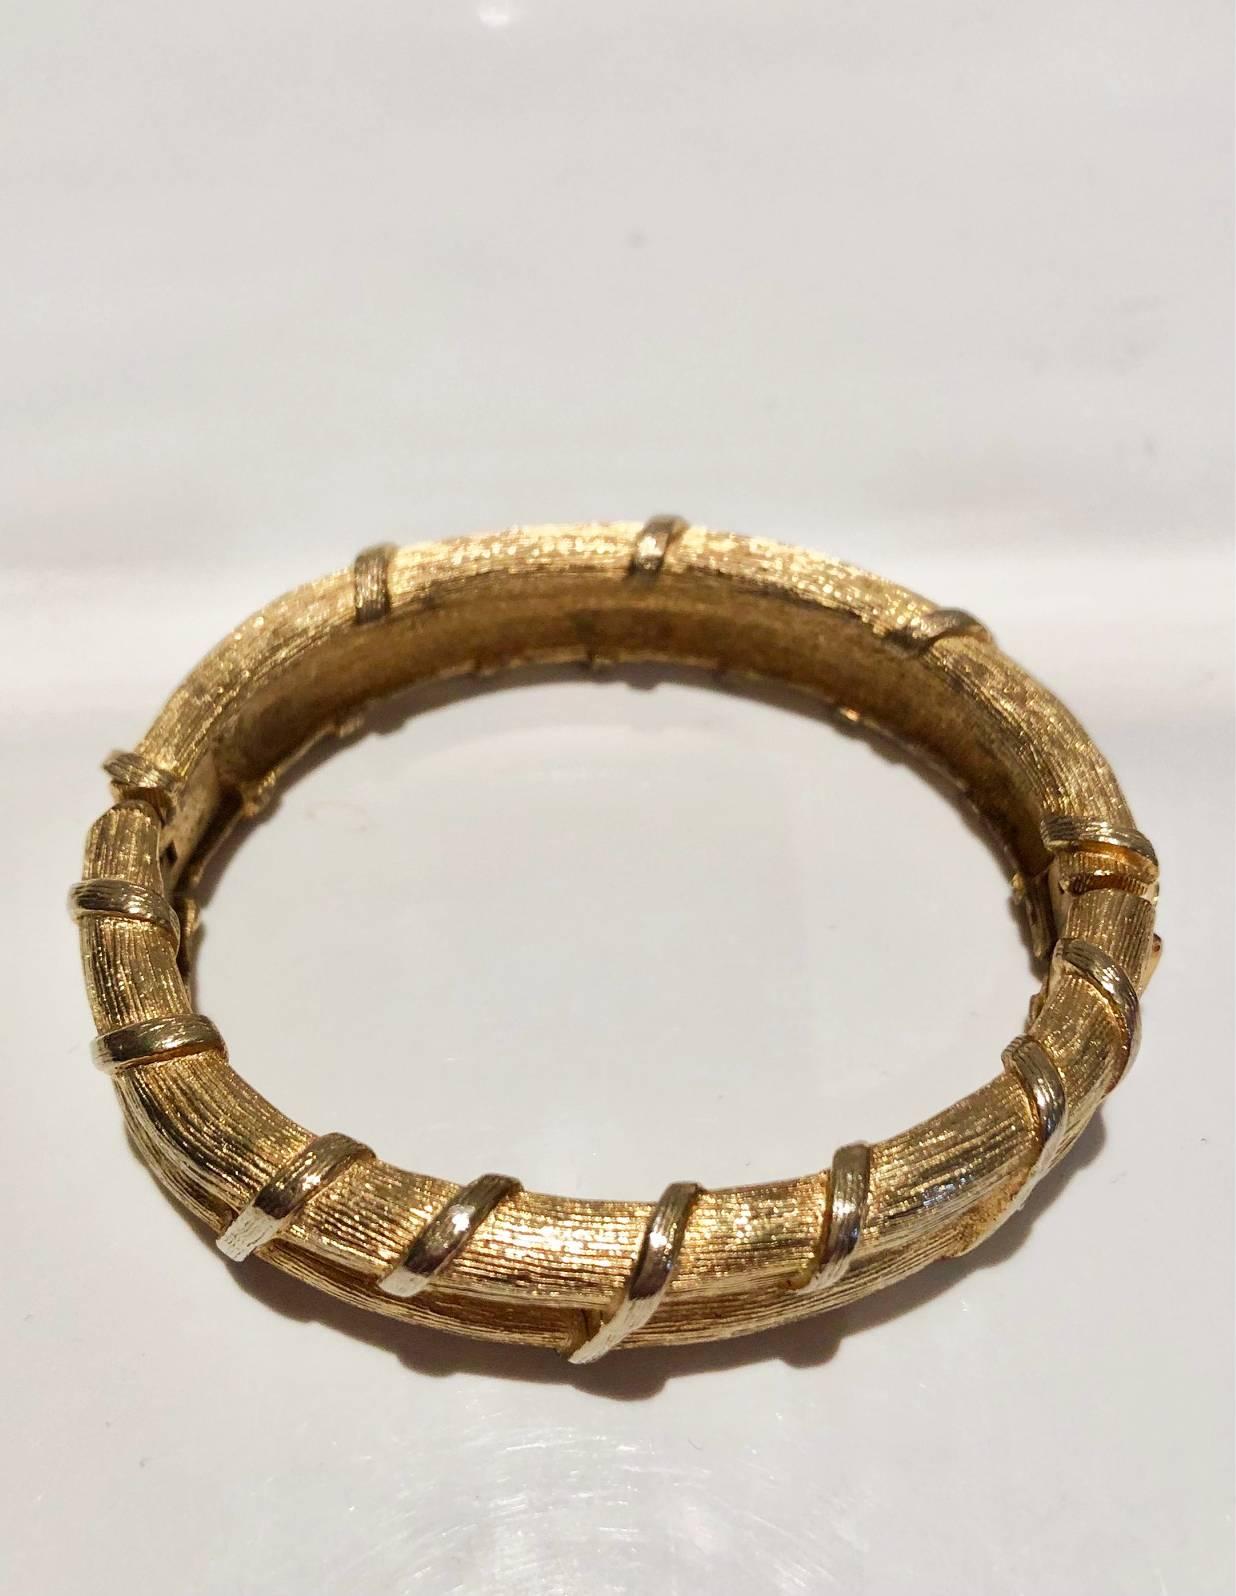 Givenchy costume jewellery slave bangle, gilt gold tone metal, clutch safe closure

Condition: vintage,1950s, wear consistent with use, very good, some light wear to gilding in places

Measurements:
- Weight: 60g
- Fits up to 6.5